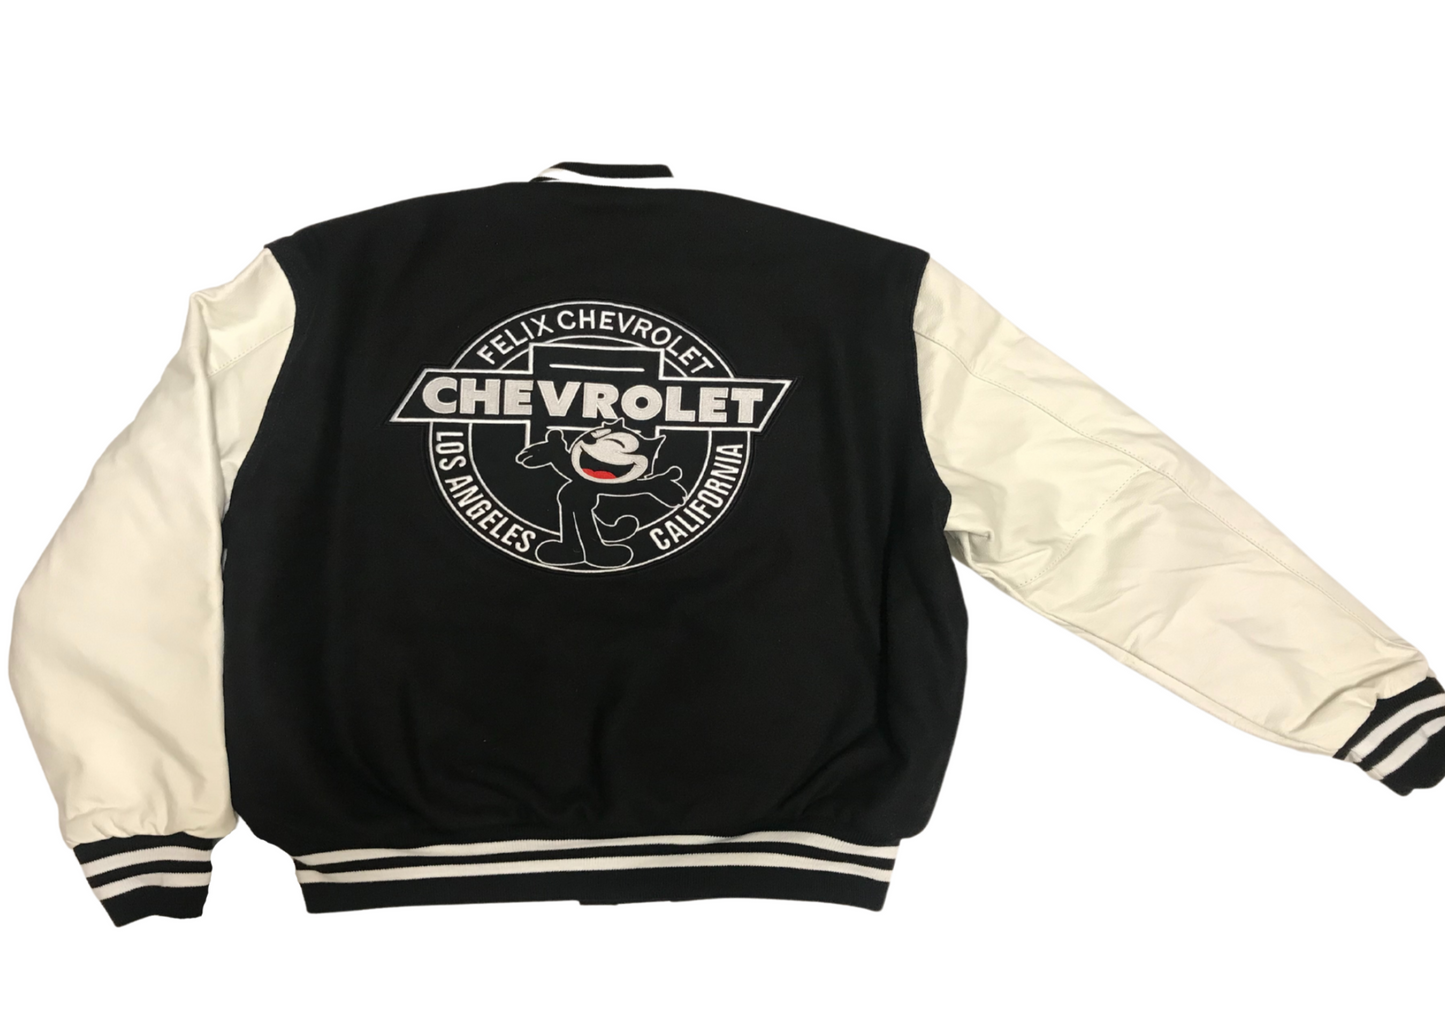 Felix Chevrolet Letterman Jacket With Genuine White Leather Sleeves